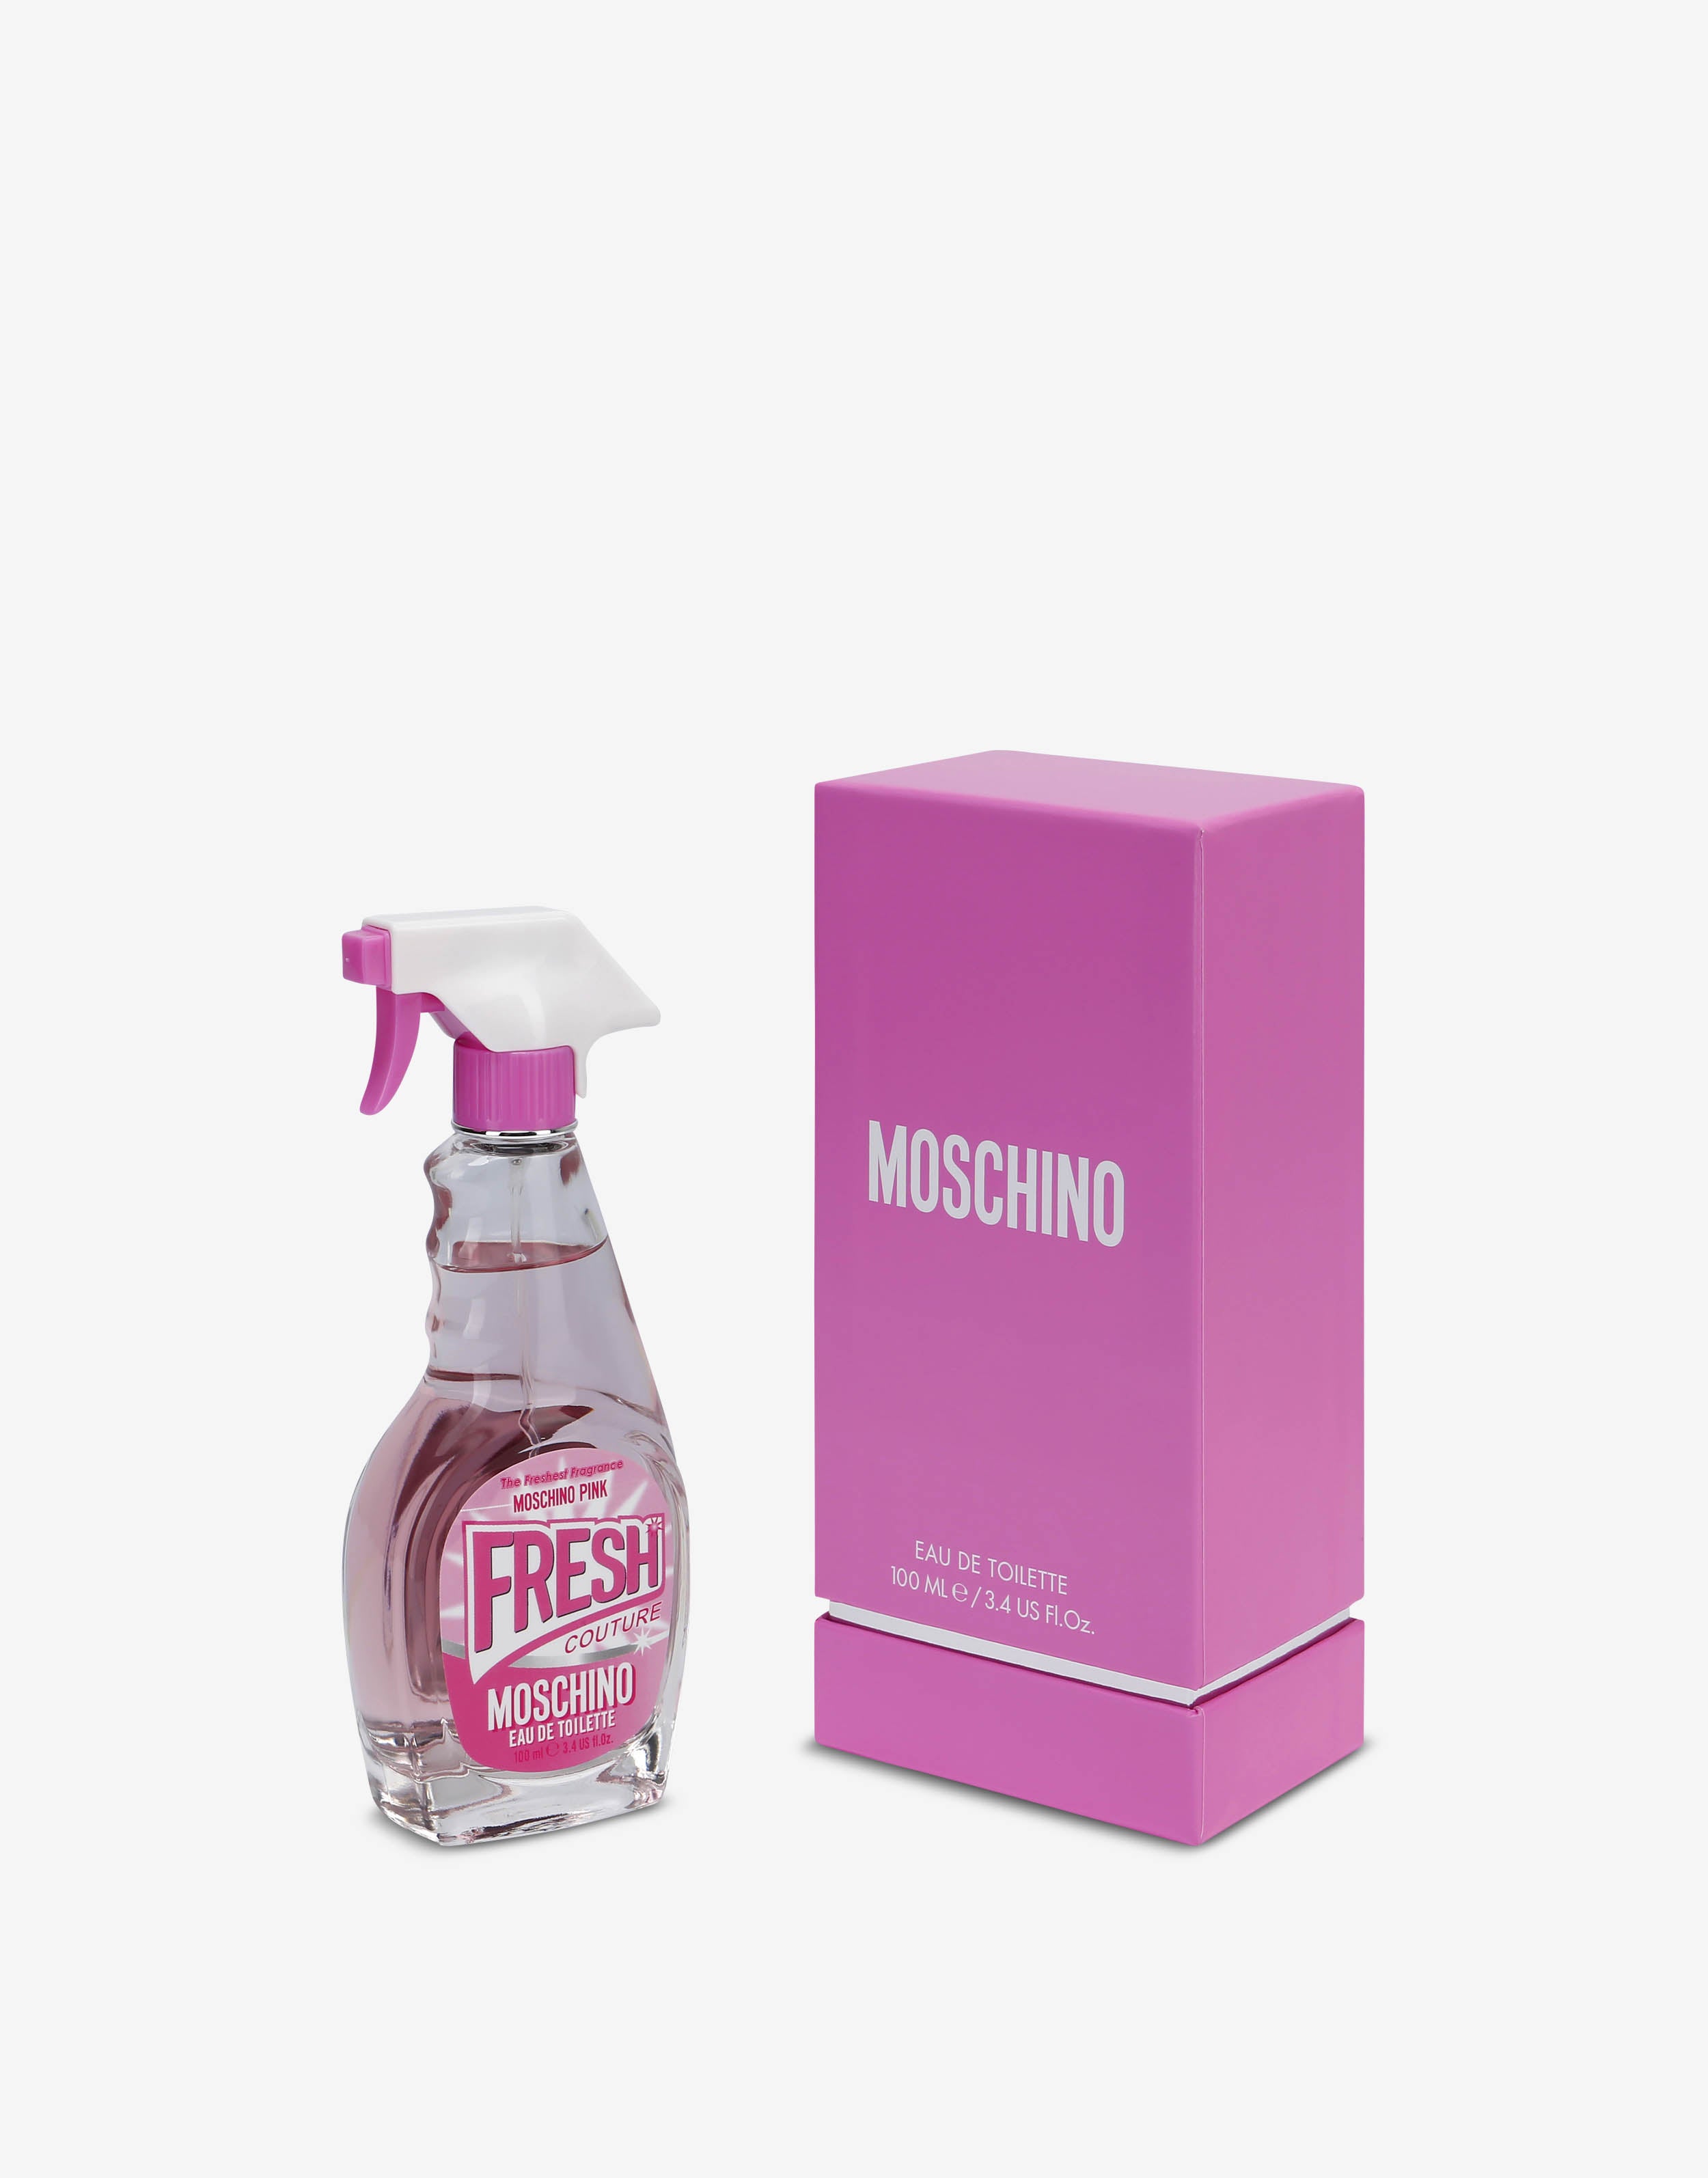 MOSCHINO FRESH COUTURE PINK 3.4oz EDT SP TS (L) SIN TAPA